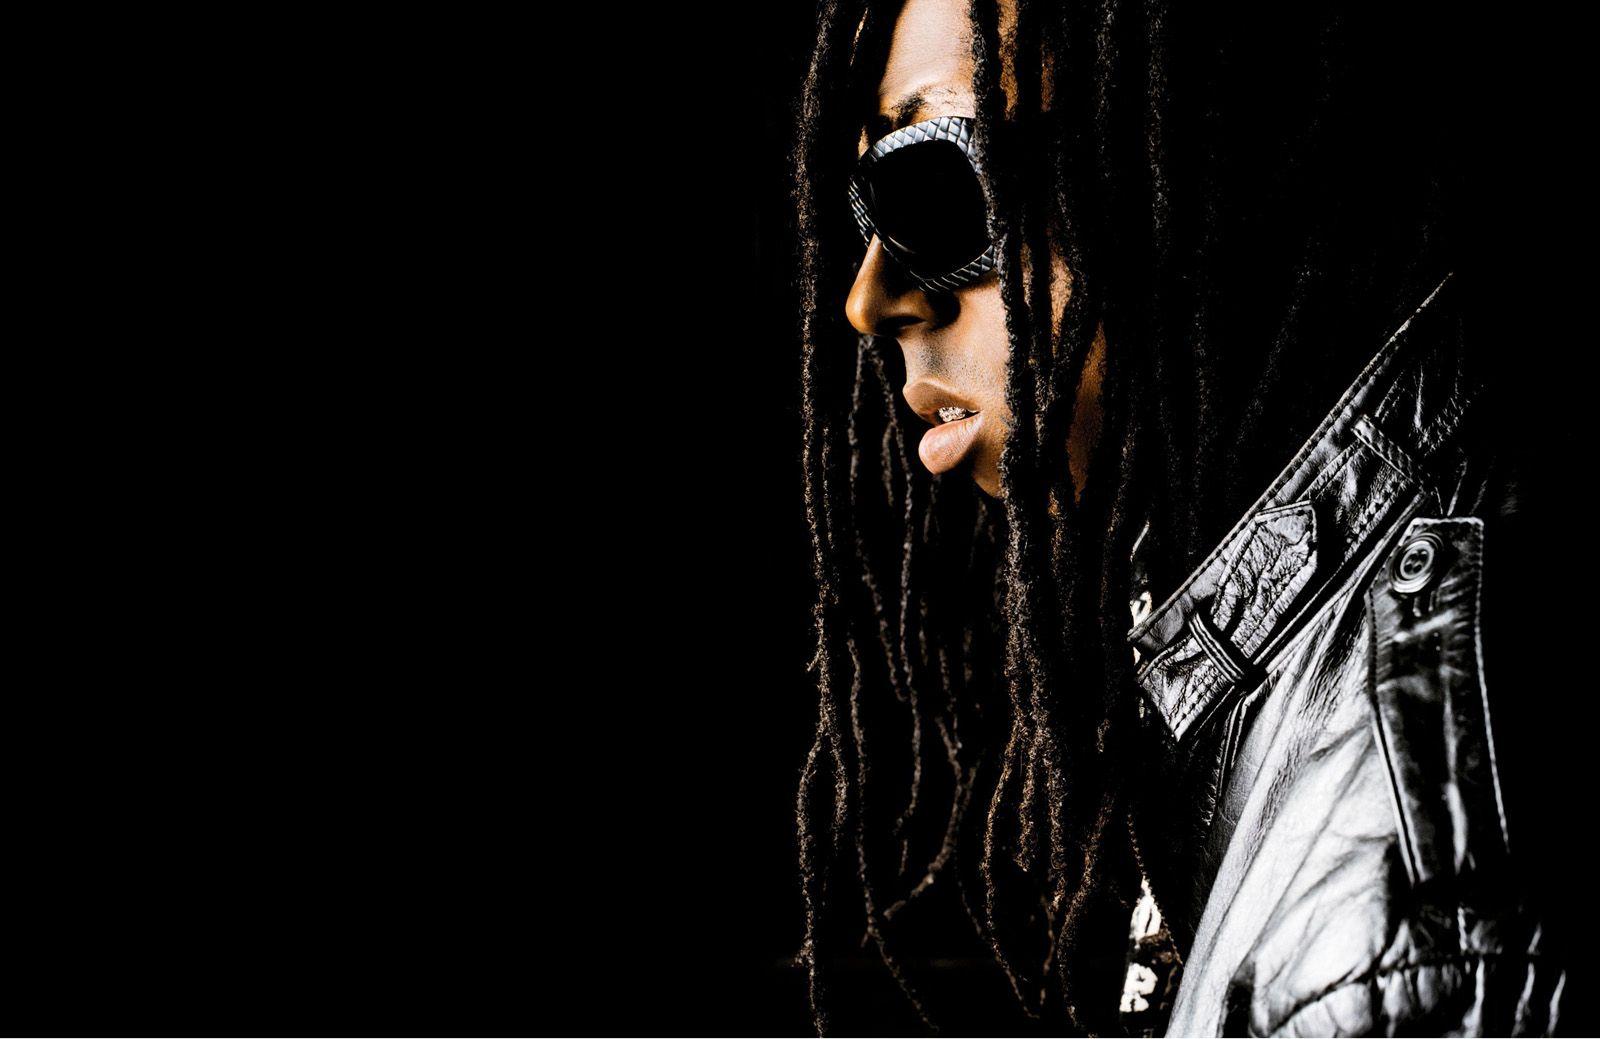 Lil Wayne Announces Positive Meeting About 'Tha Carter V' Release Date